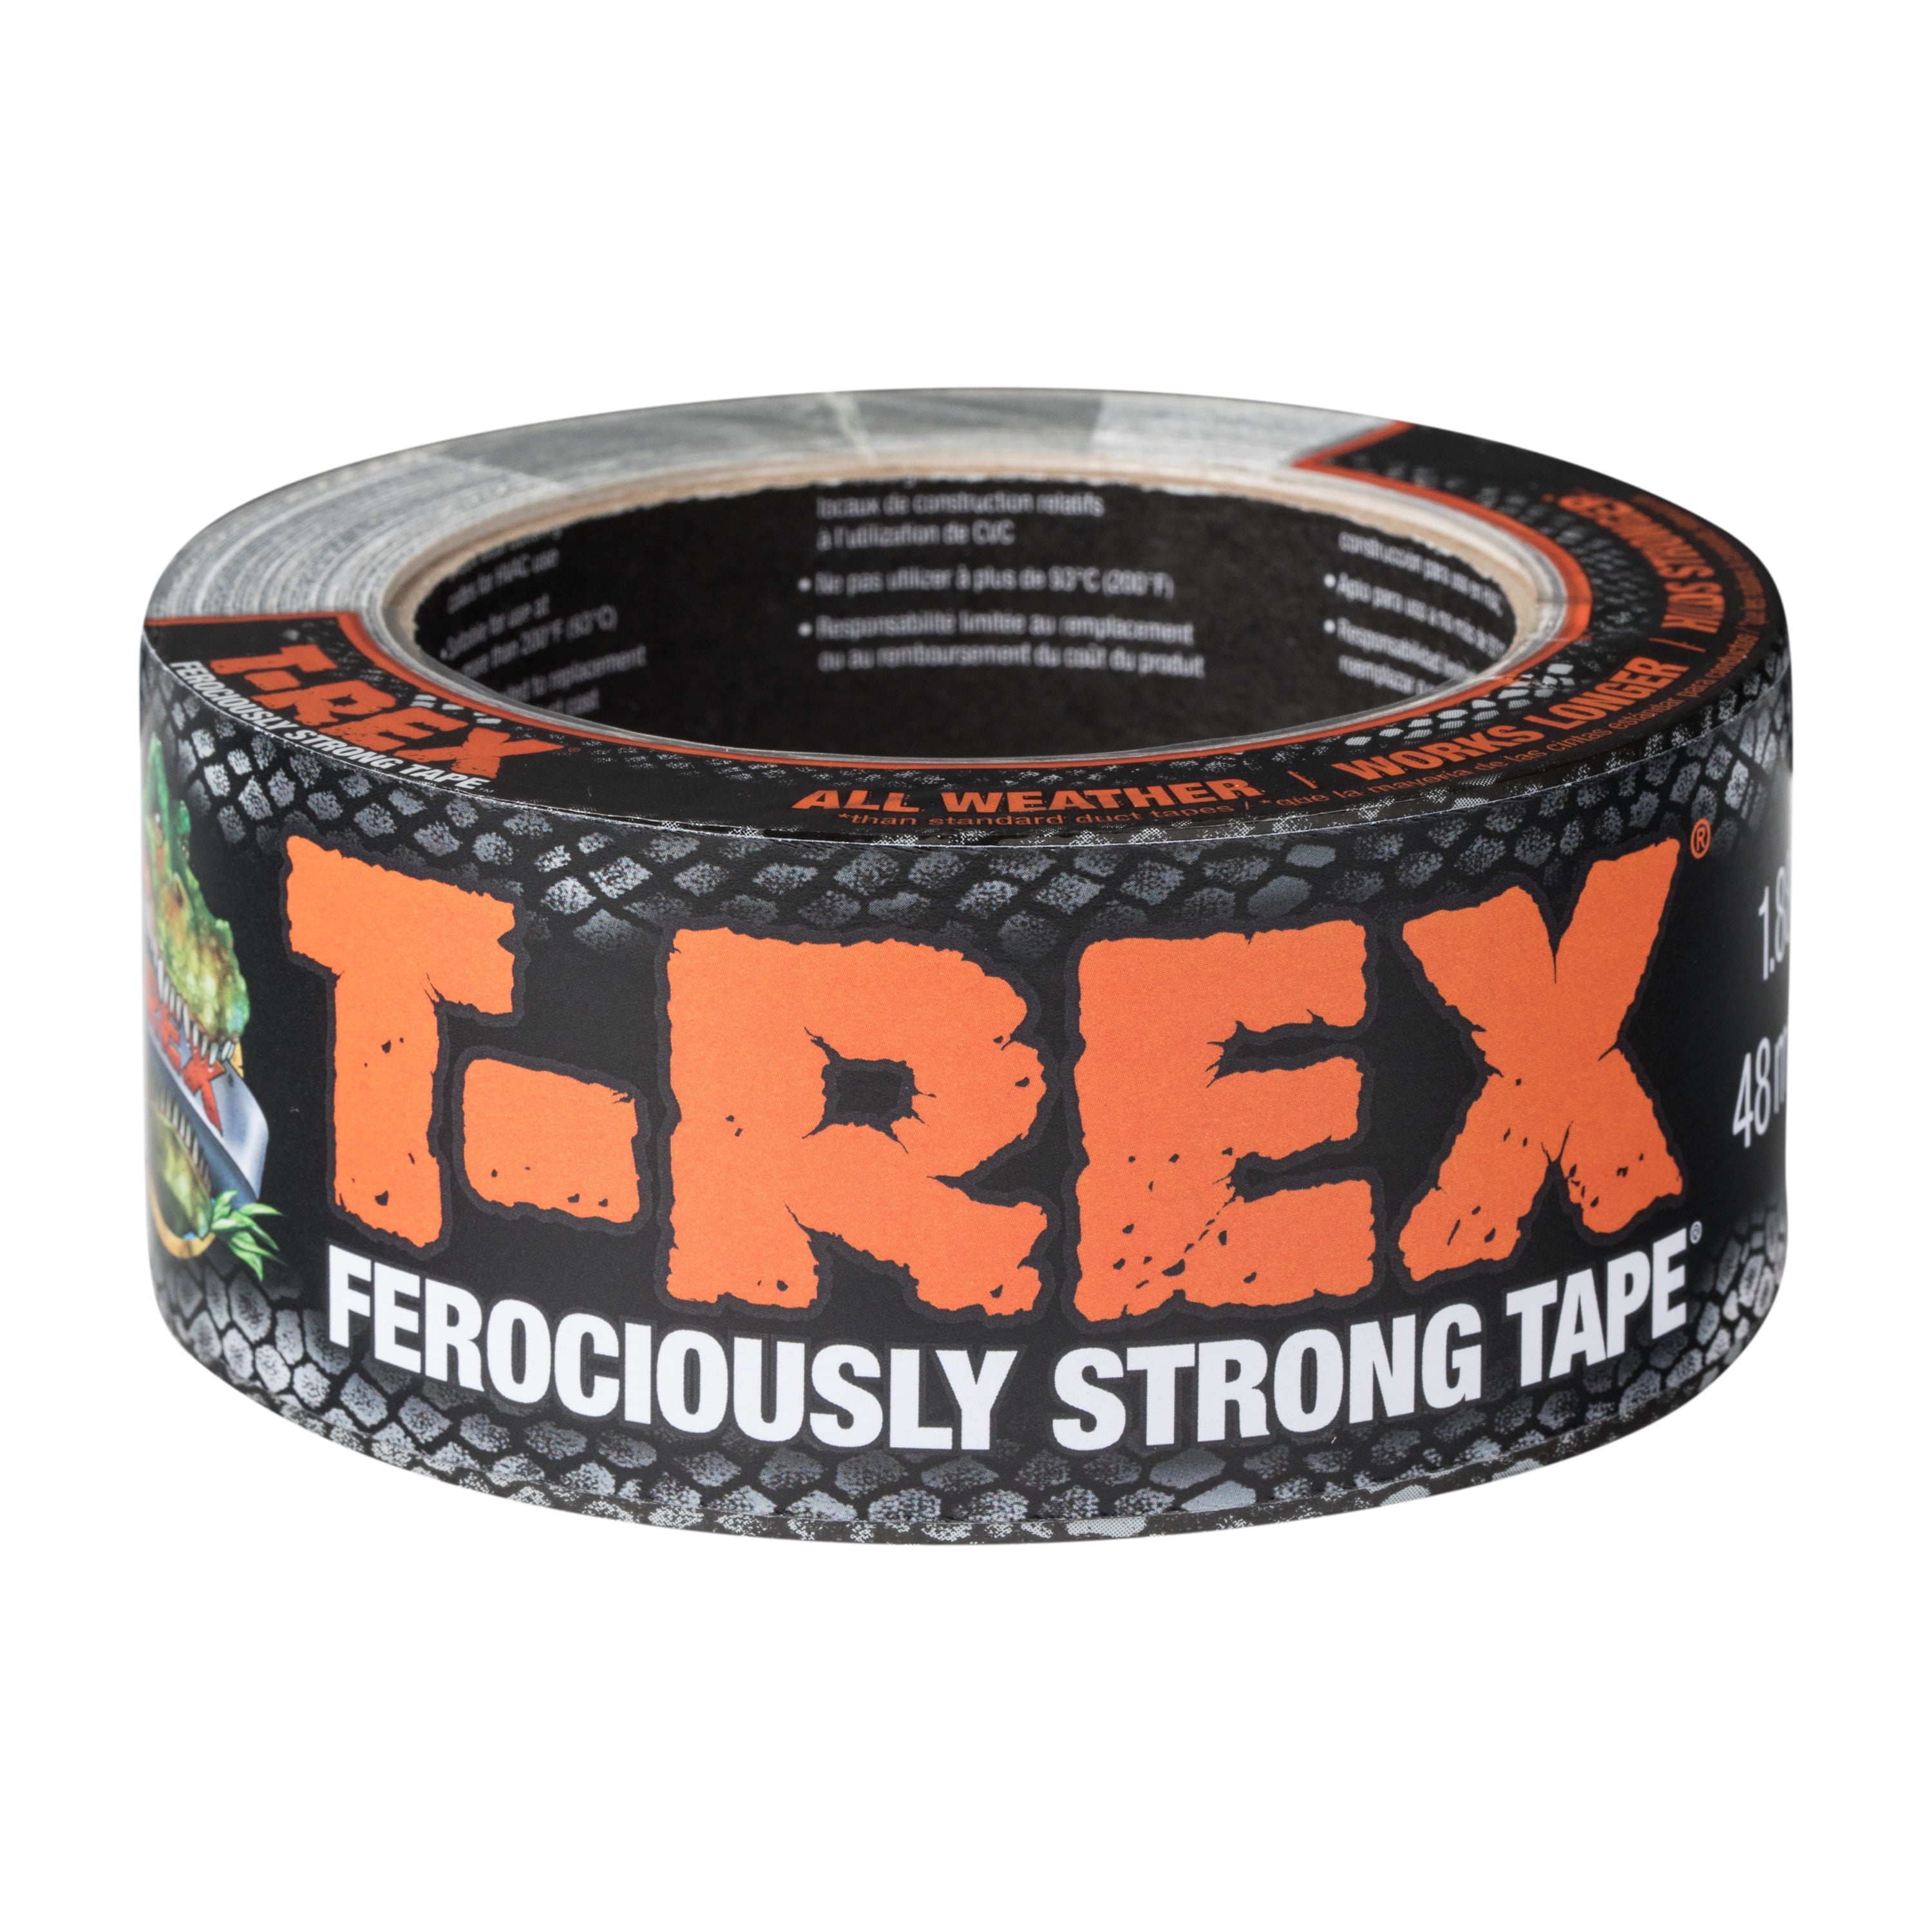 x 12 yd Gunmetal Gray Duct Tape T-Rex Ferociously Strong 1.88 in 